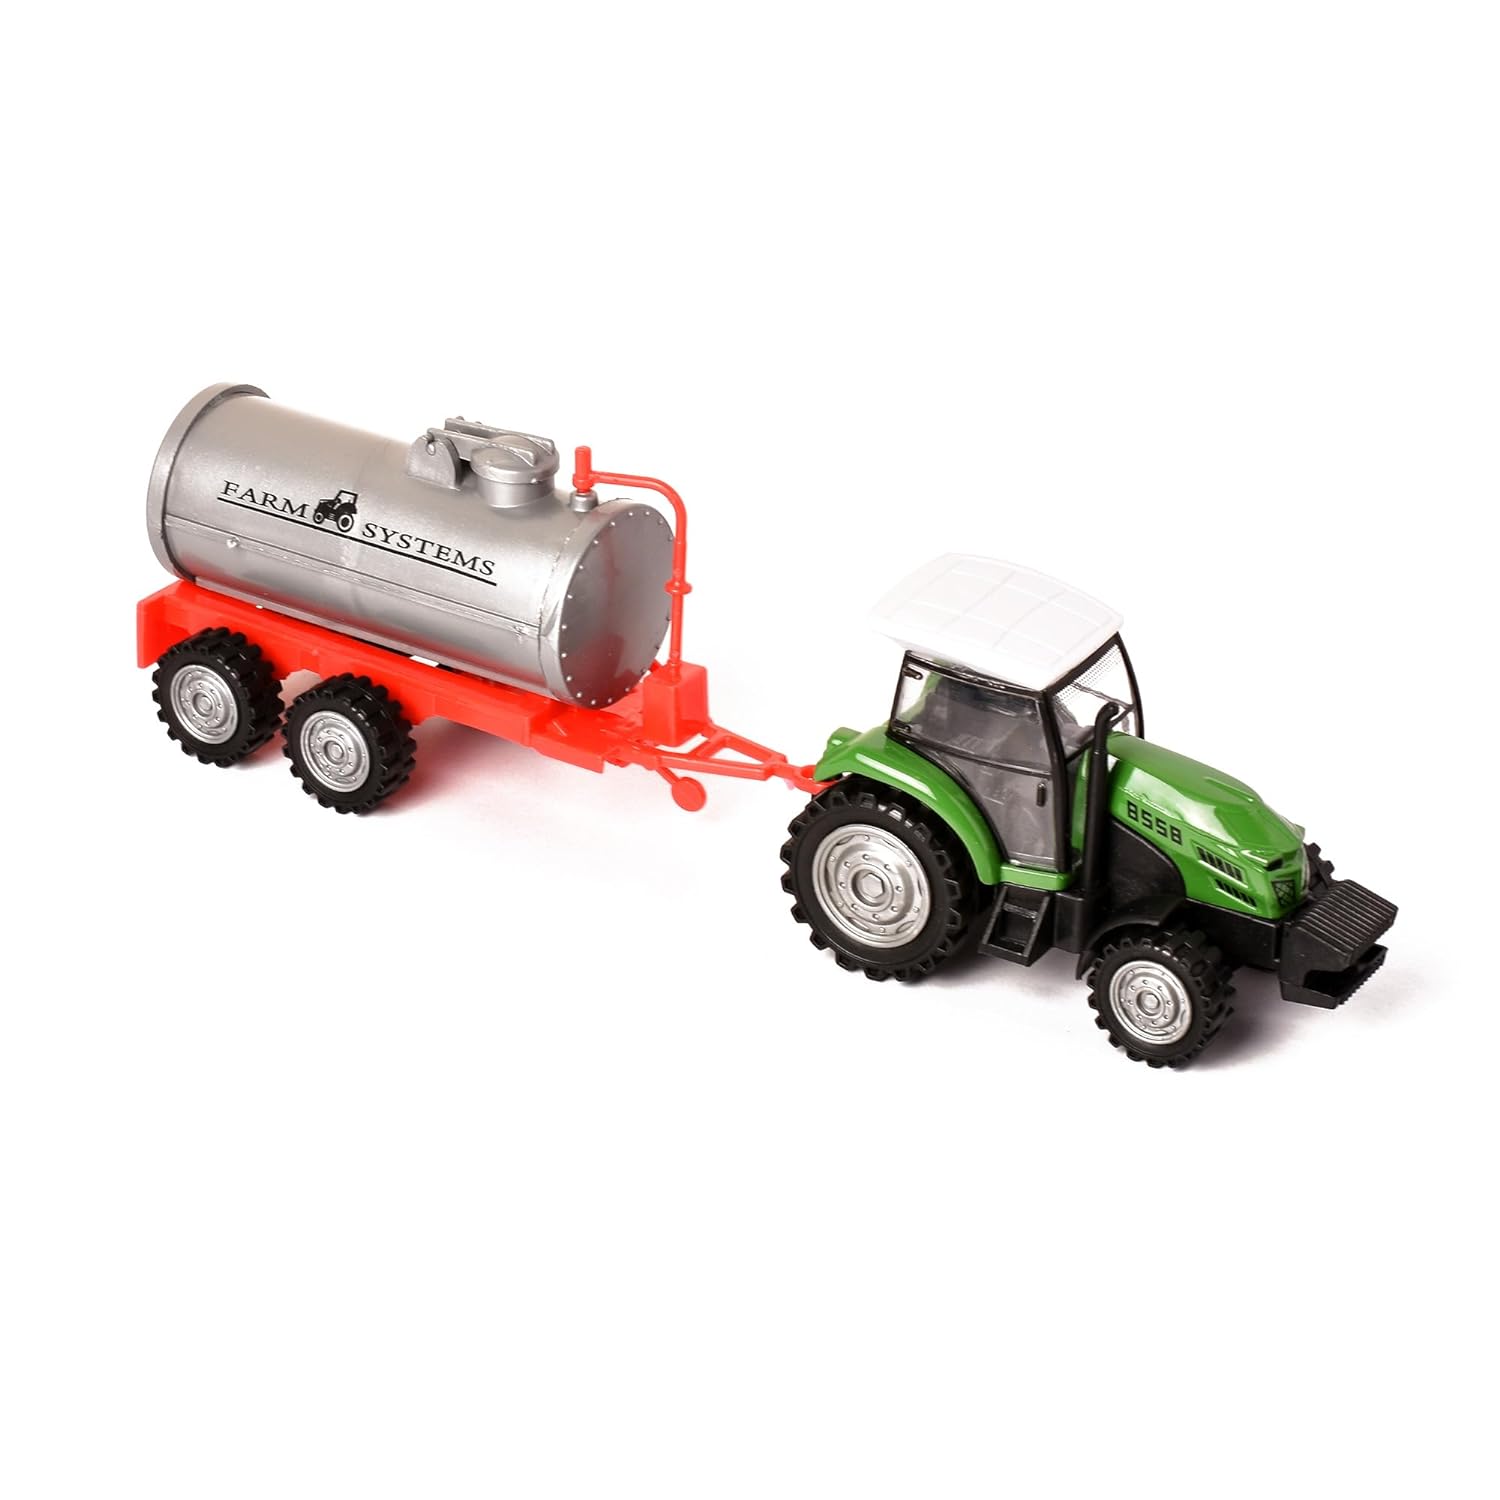 Braintastic Pull Back Tractor with Milk Tank Inertia Vehicles Farm Tractor Truck Agriculture Farm Friction Power Toy for Kids Age 3+ Years (Red Green)